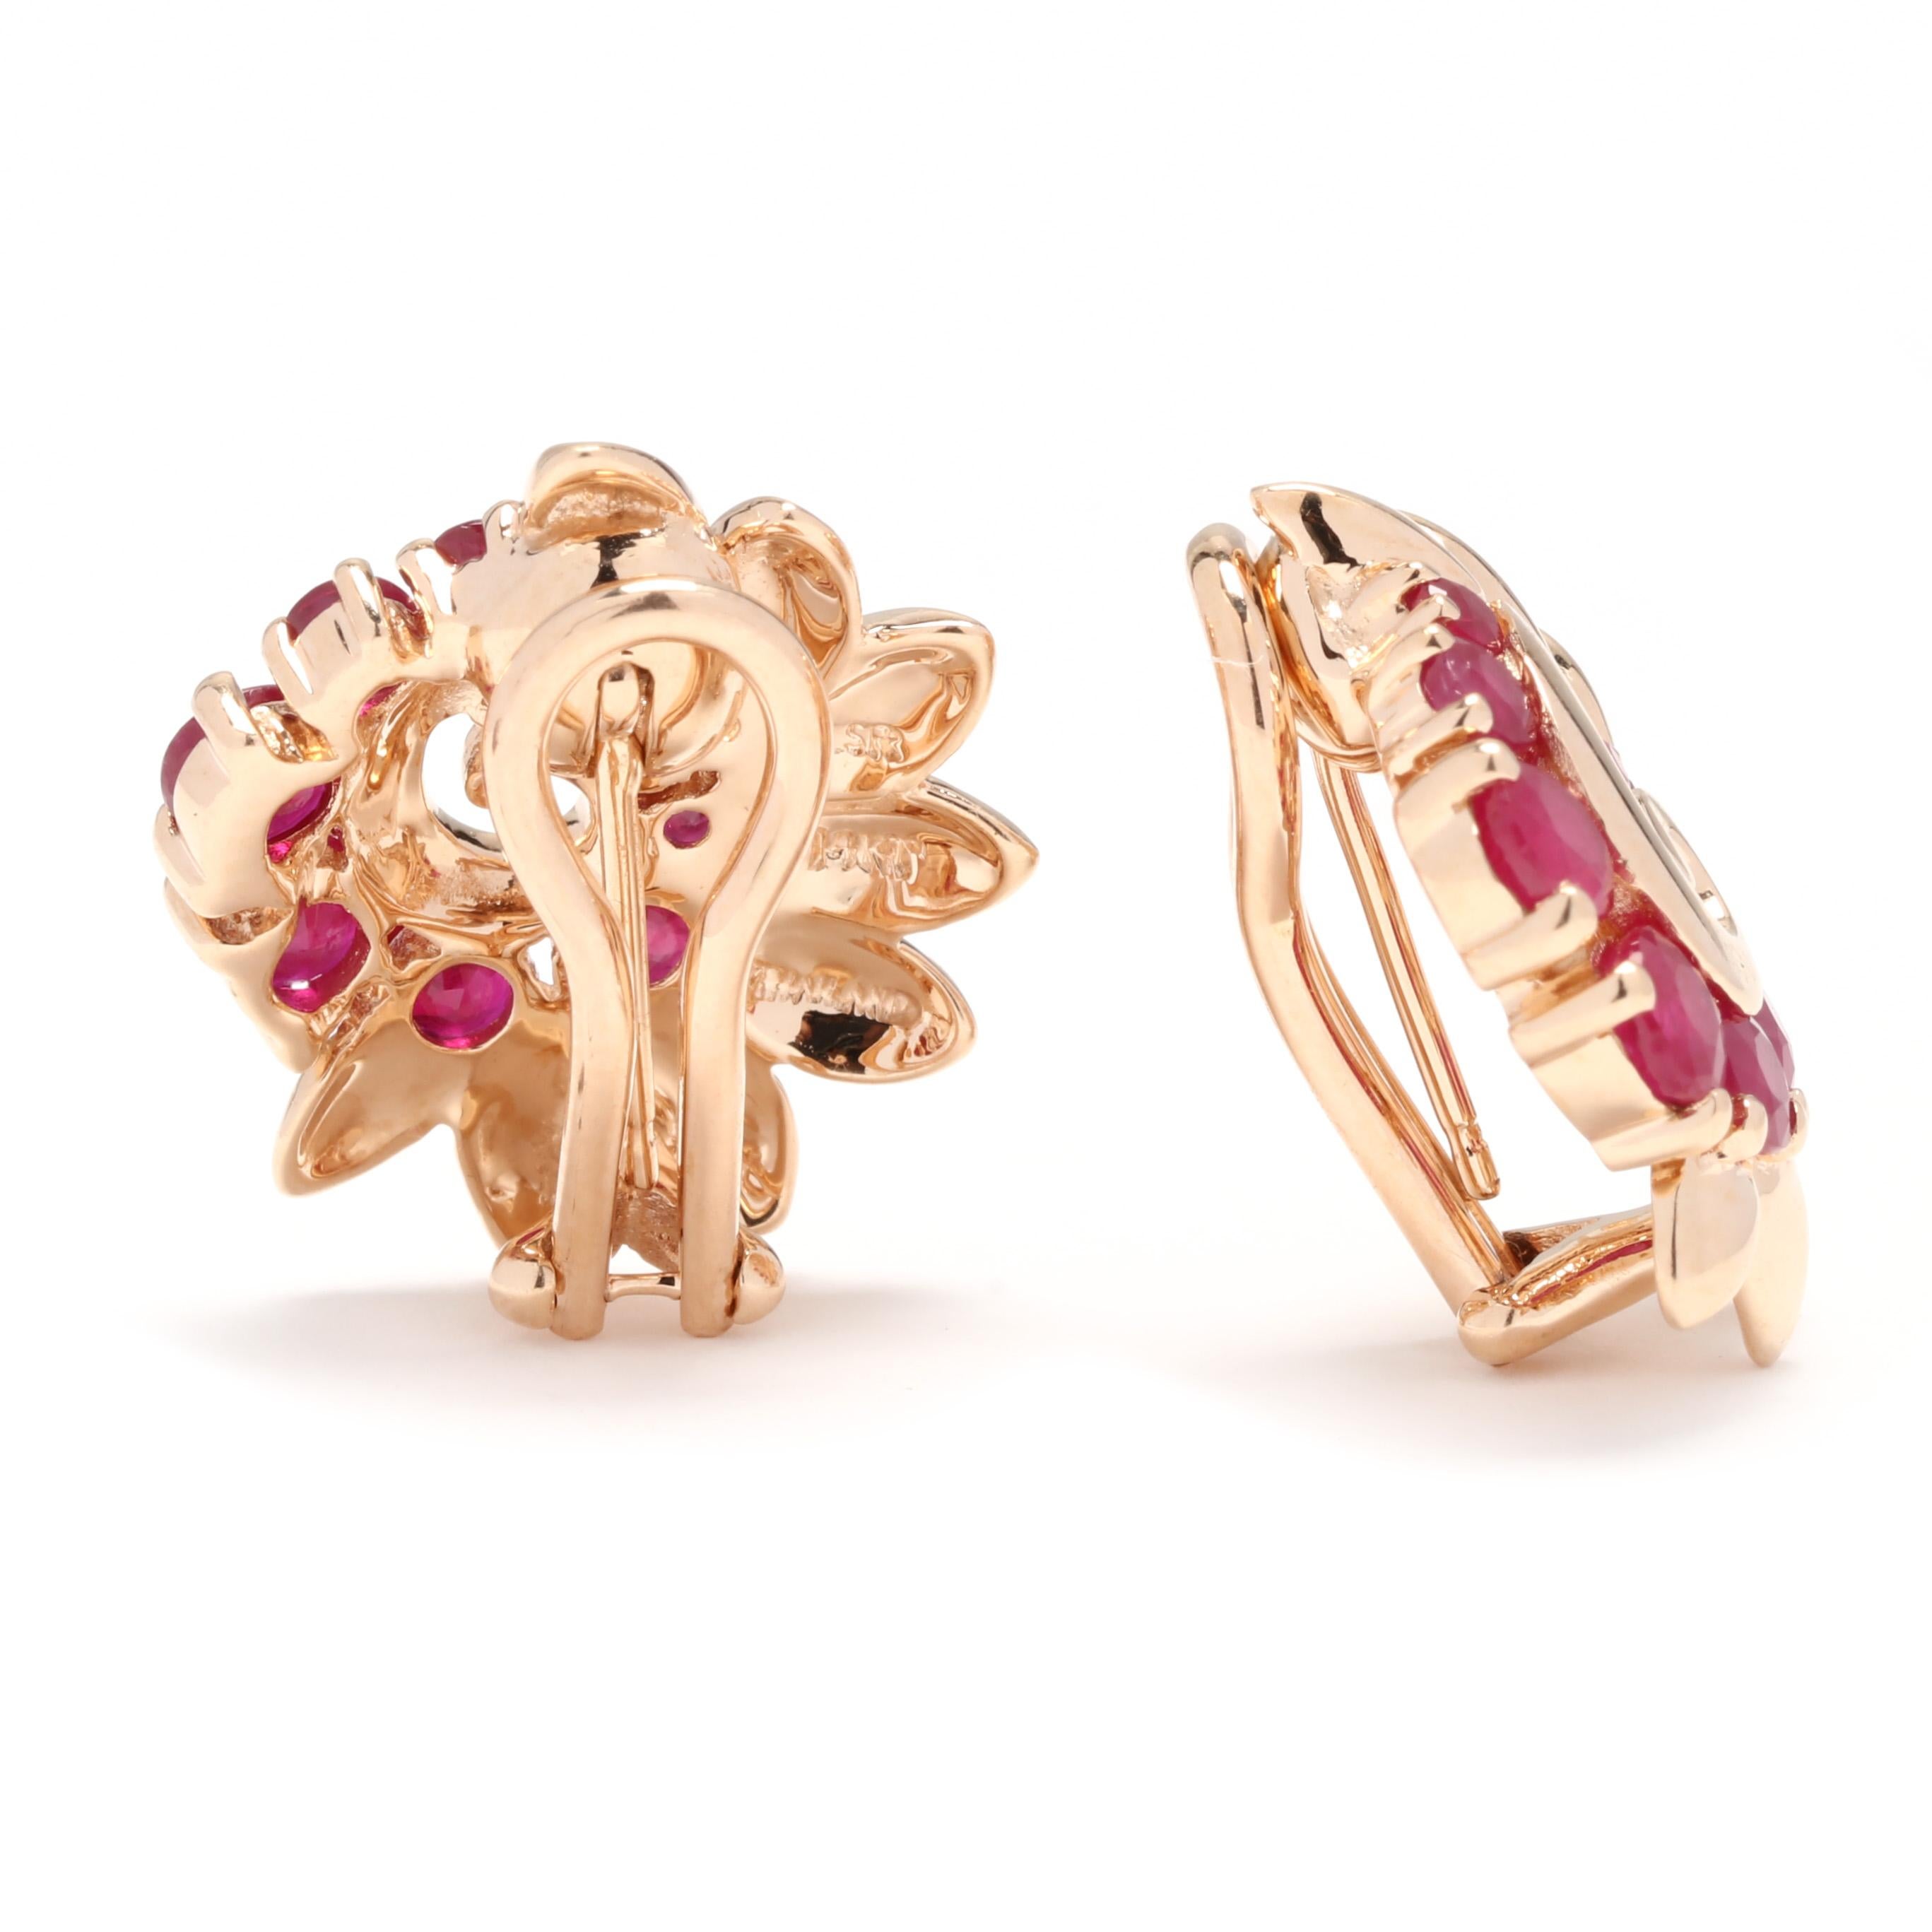 A pair of retro 14 karat yellow gold ruby swirl earrings. These classic earrings feature a swirl motif of gold marquise accents with round cut rubies weighing approximately 1 total carat and with collapsible post clip on backs.

Stones:
- ruby, 18